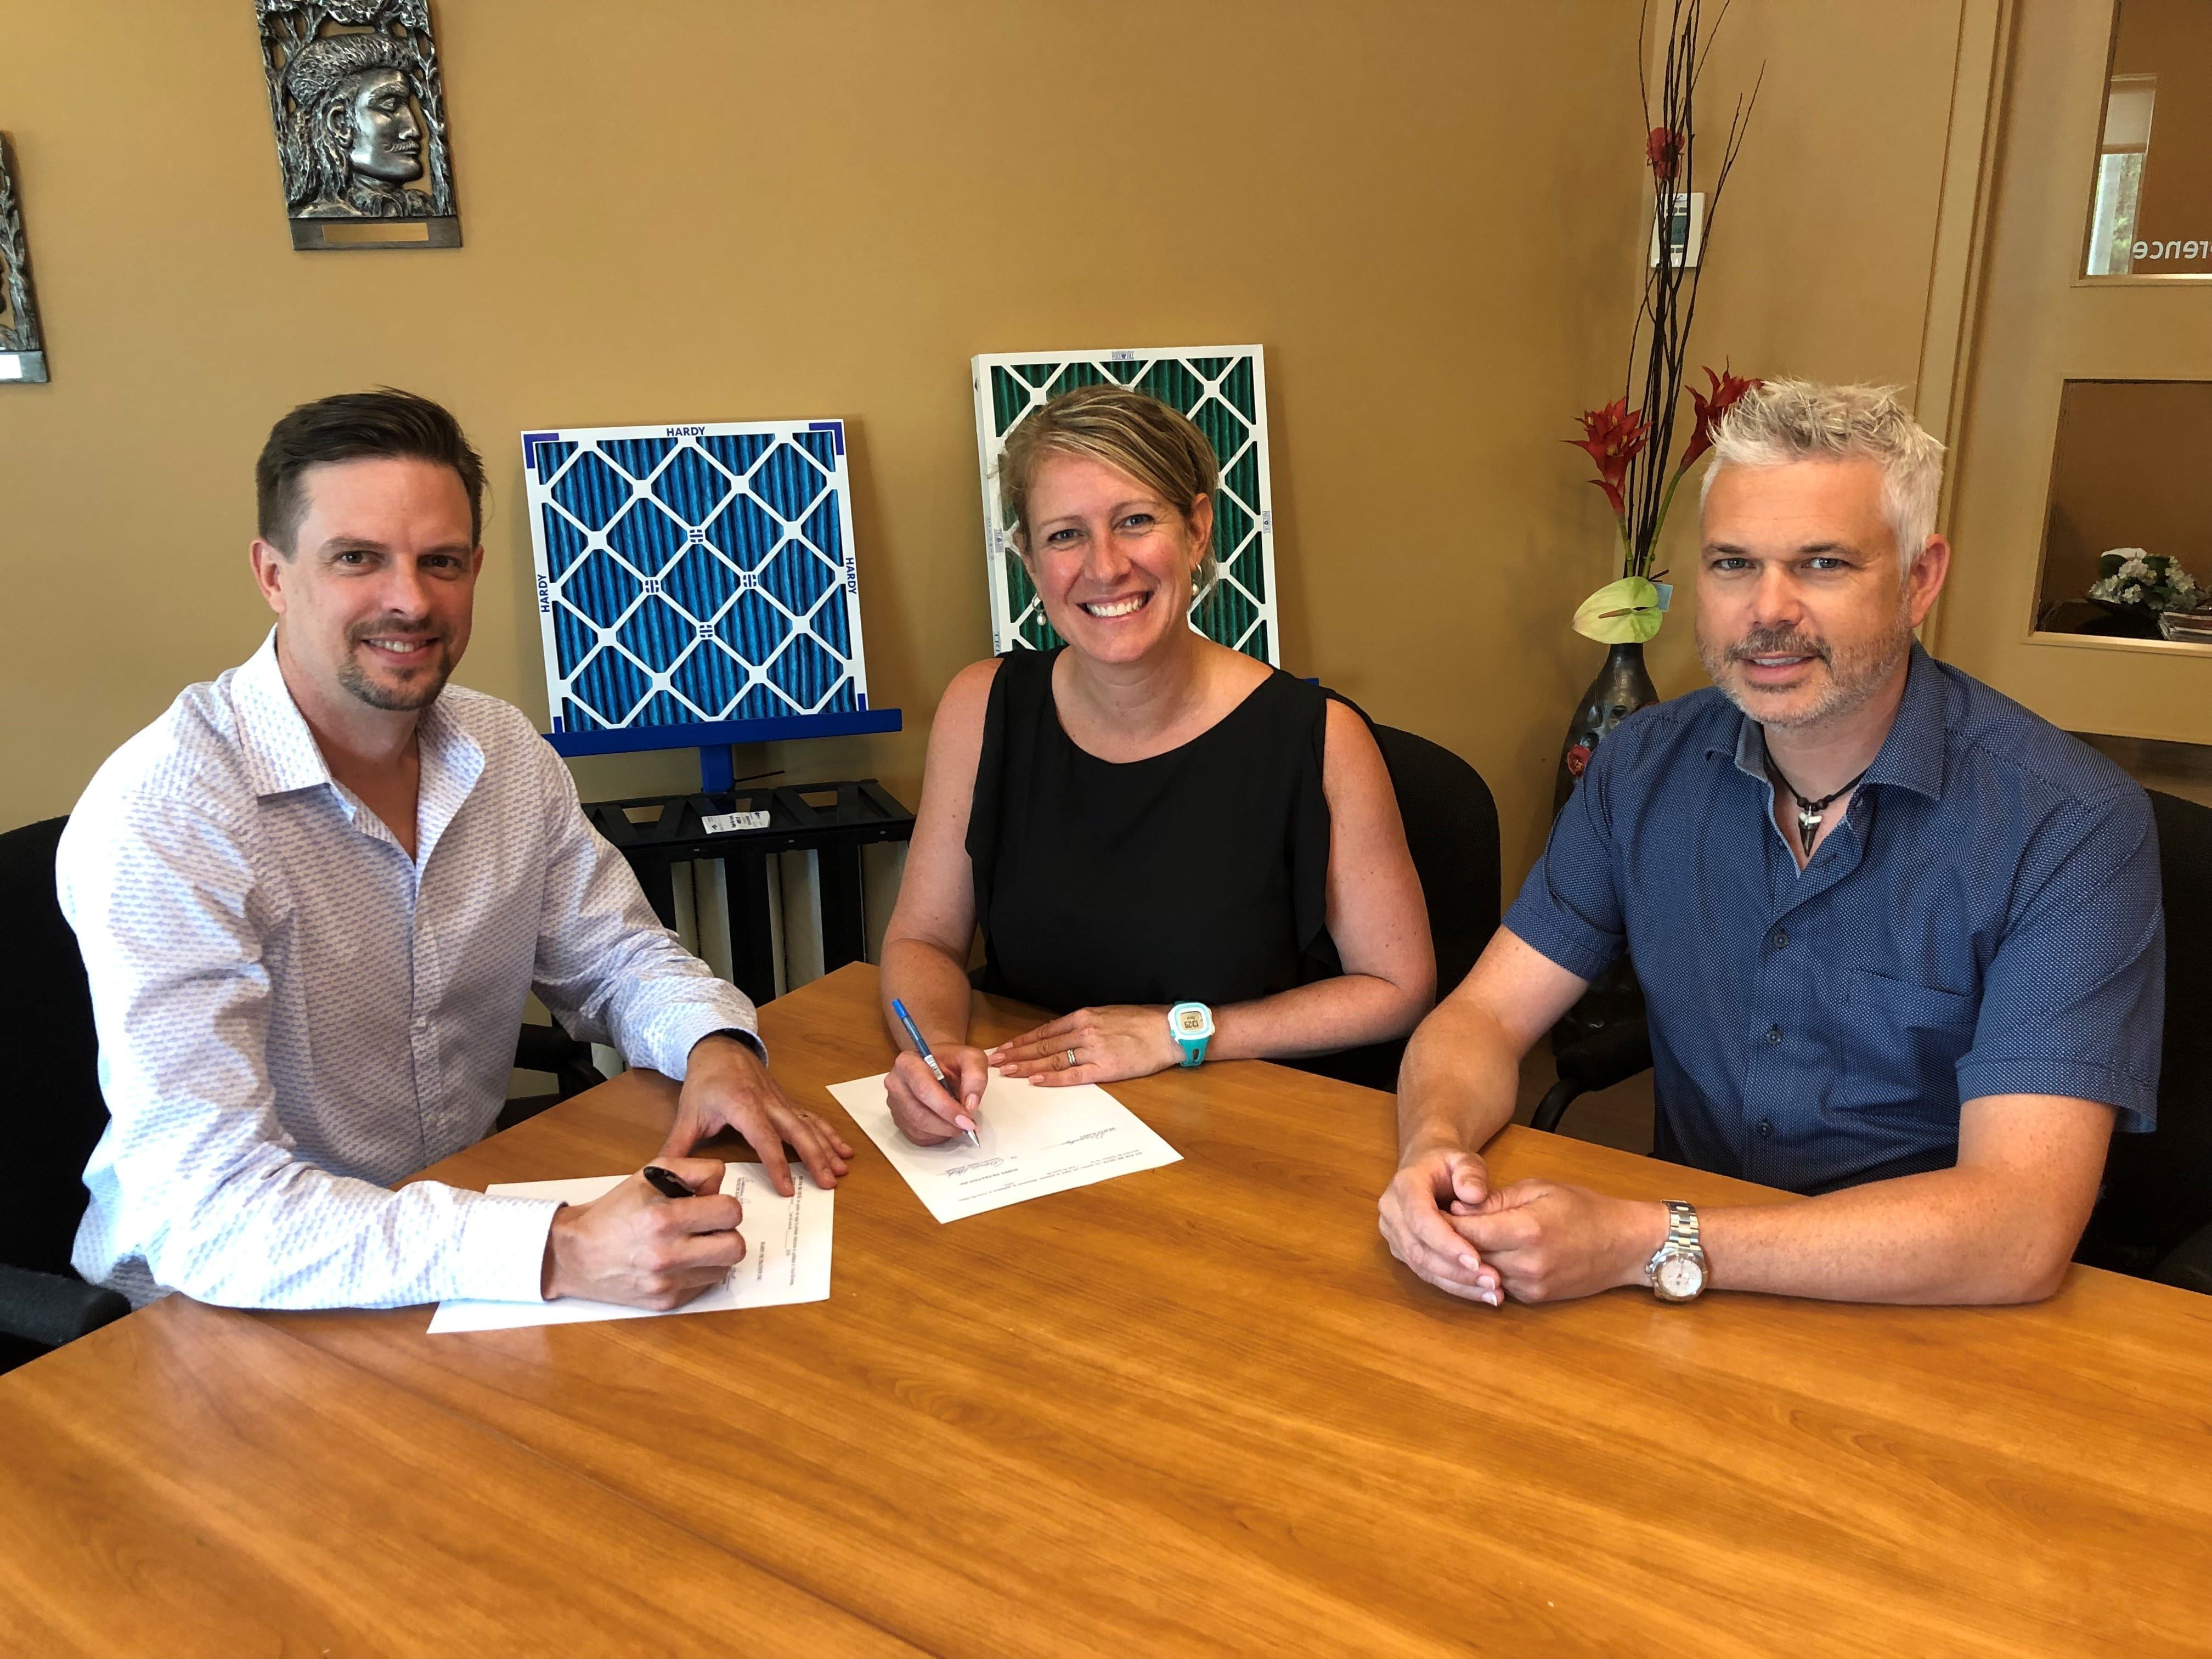 Signing the acquisition. Left to right: Graham MacDonald, Geneviève Hardy and Luc Girard.